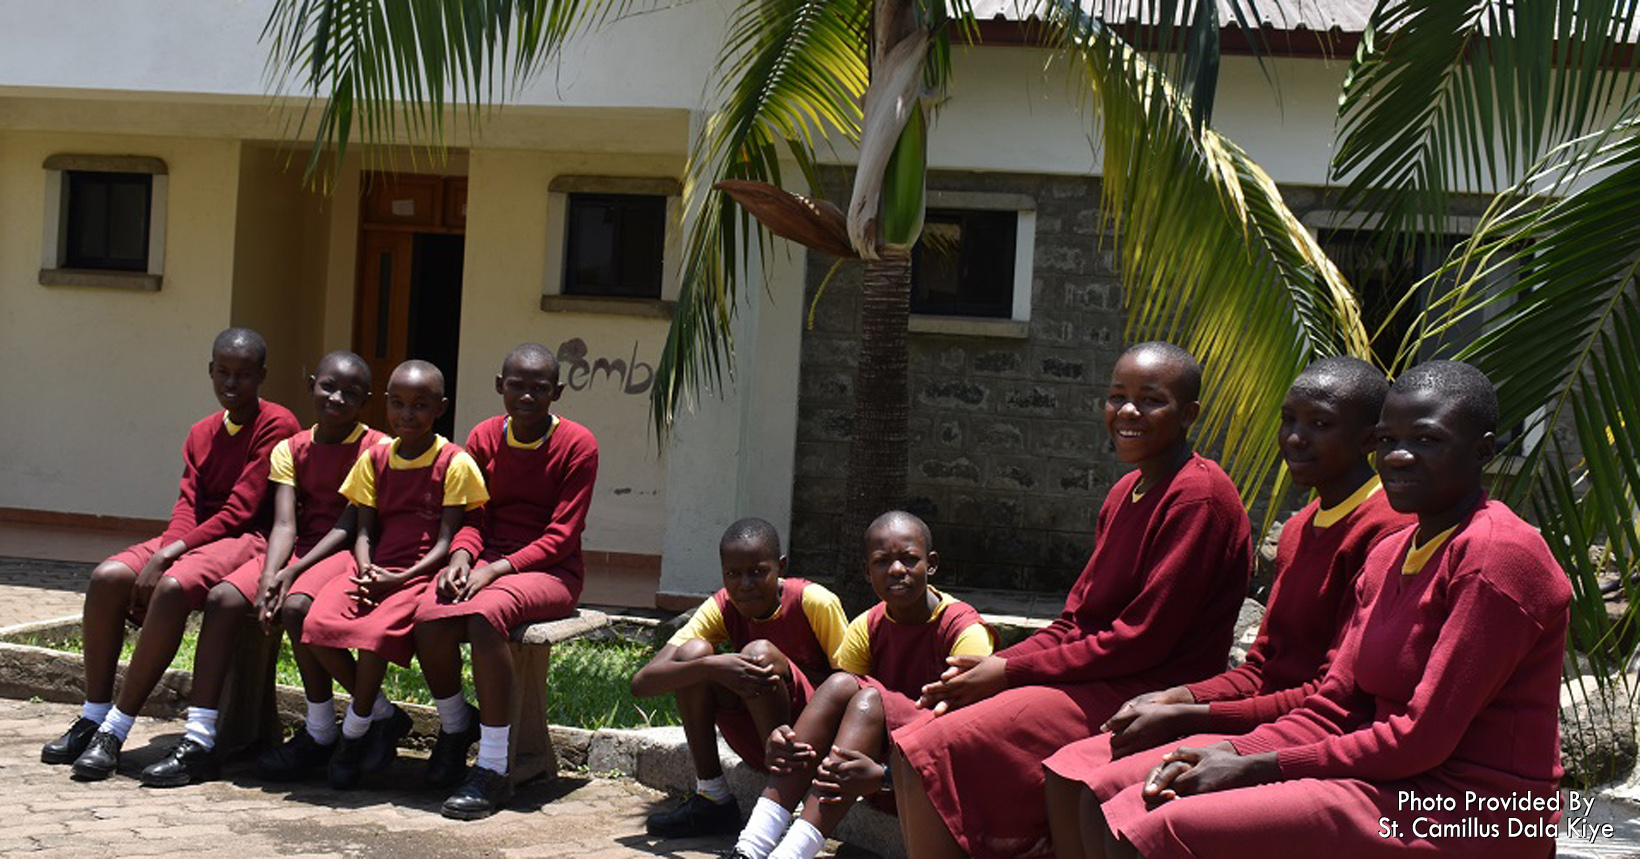 Children in their school uniforms sit outside the homes.